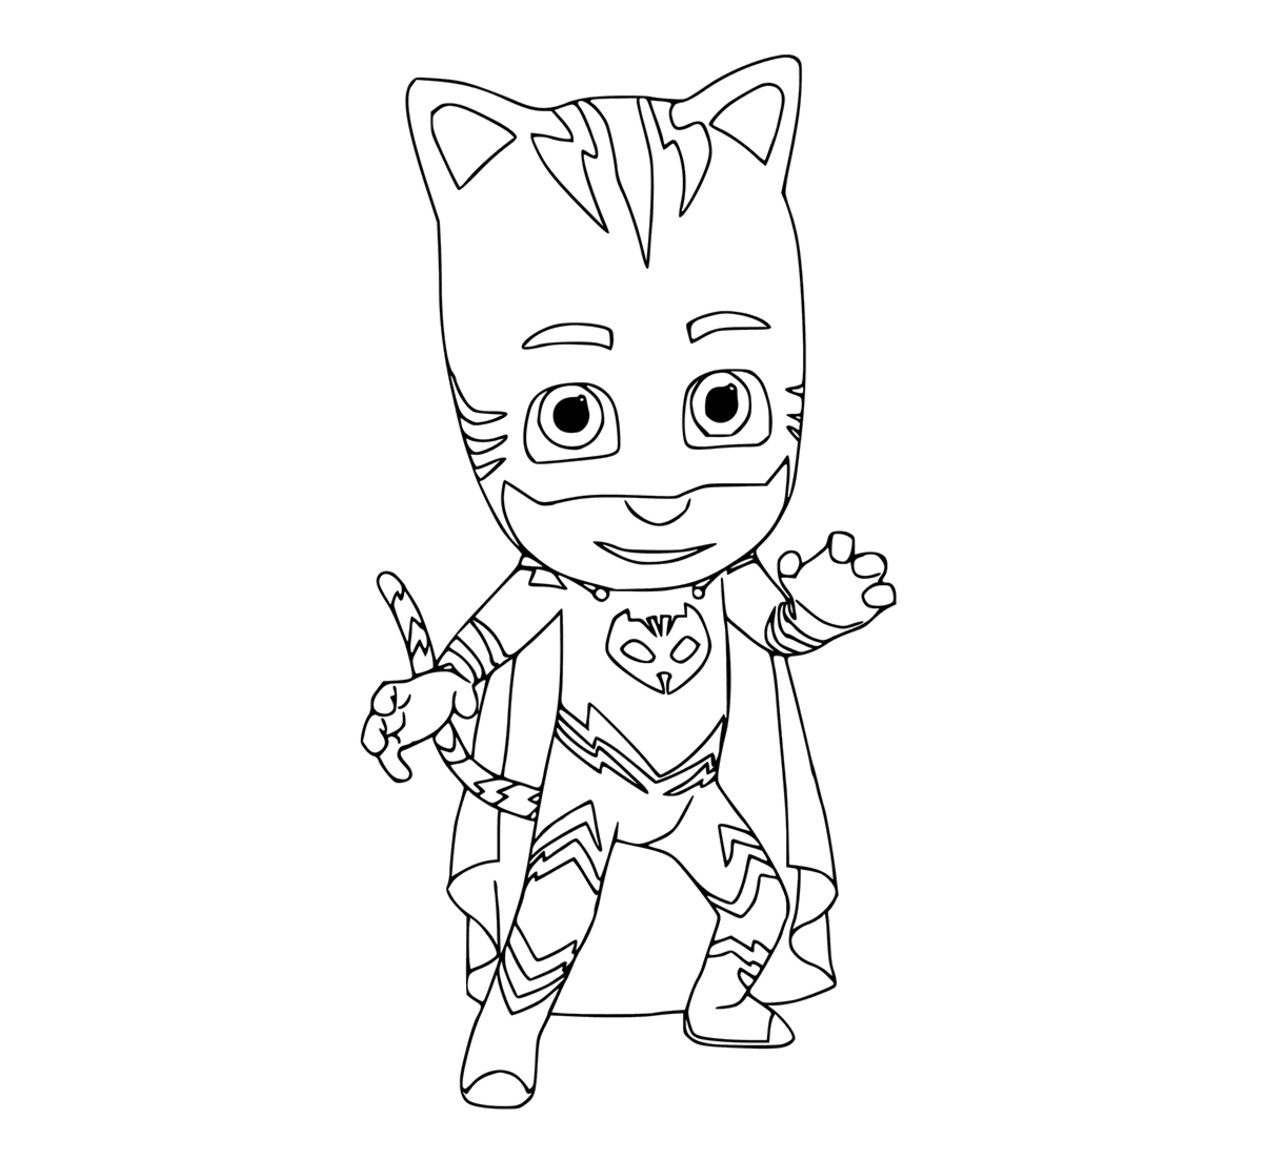 Free Coloring Sheets For Boys Pj Mask
 PJ Masks Coloring Pages Coloring Home